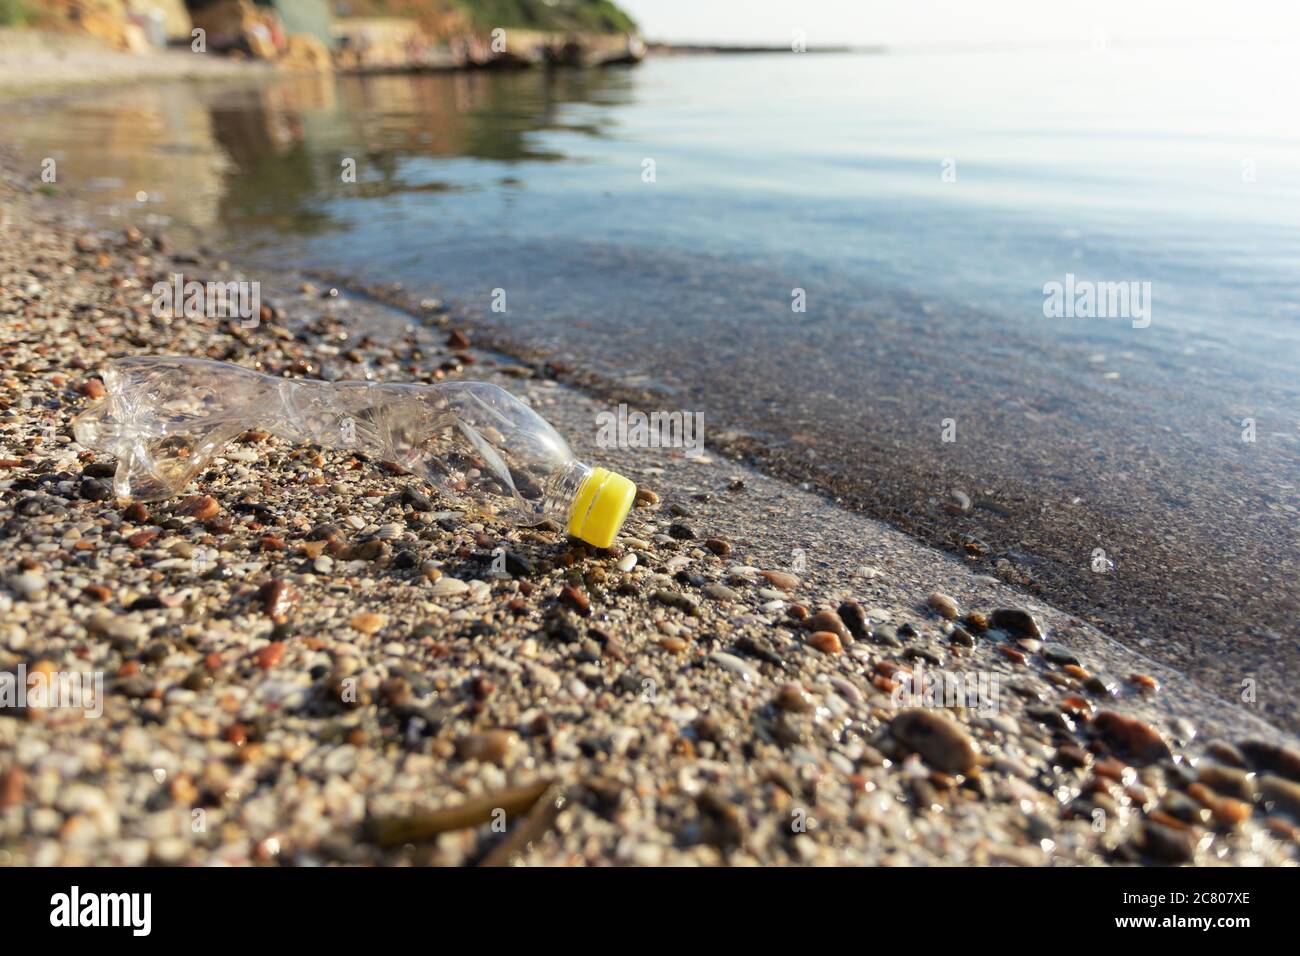 Wasted Plastic Bottle Lying On Sand Near Water, Blank Space Stock Photo